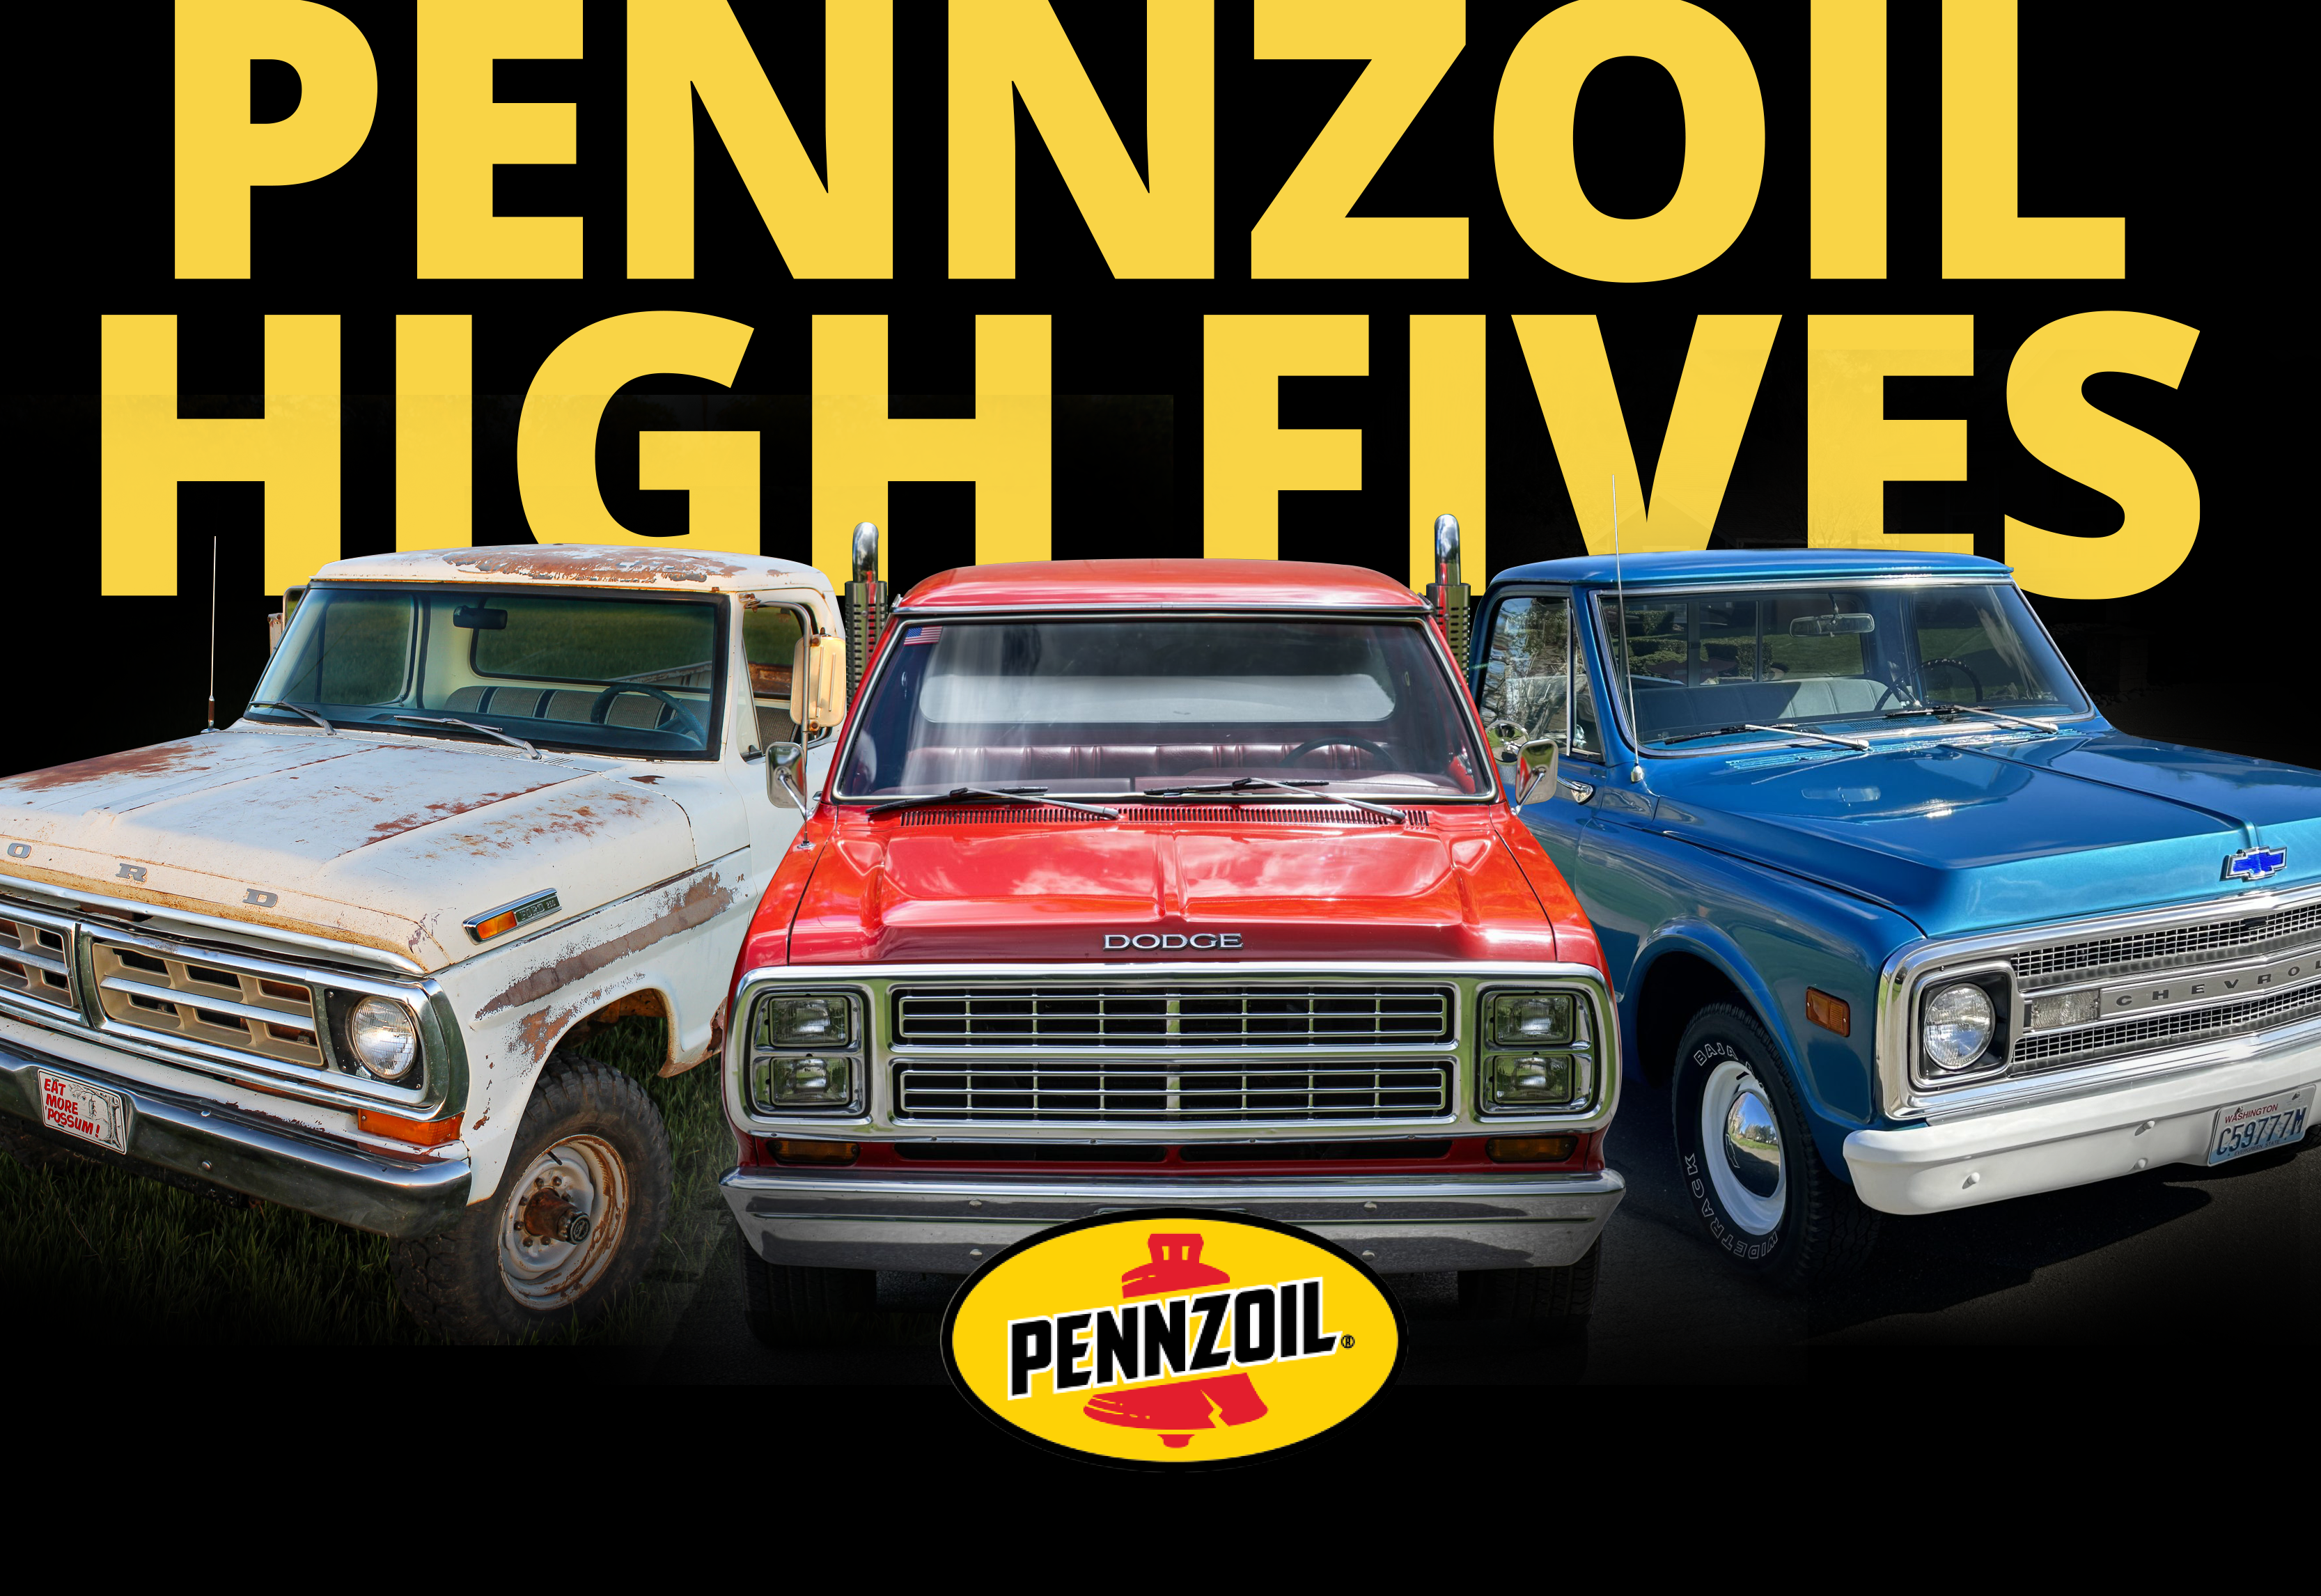 Used Our July 4 Pennzoil High Fives Winners: fastgteddie, hobutler, and hjons! Review